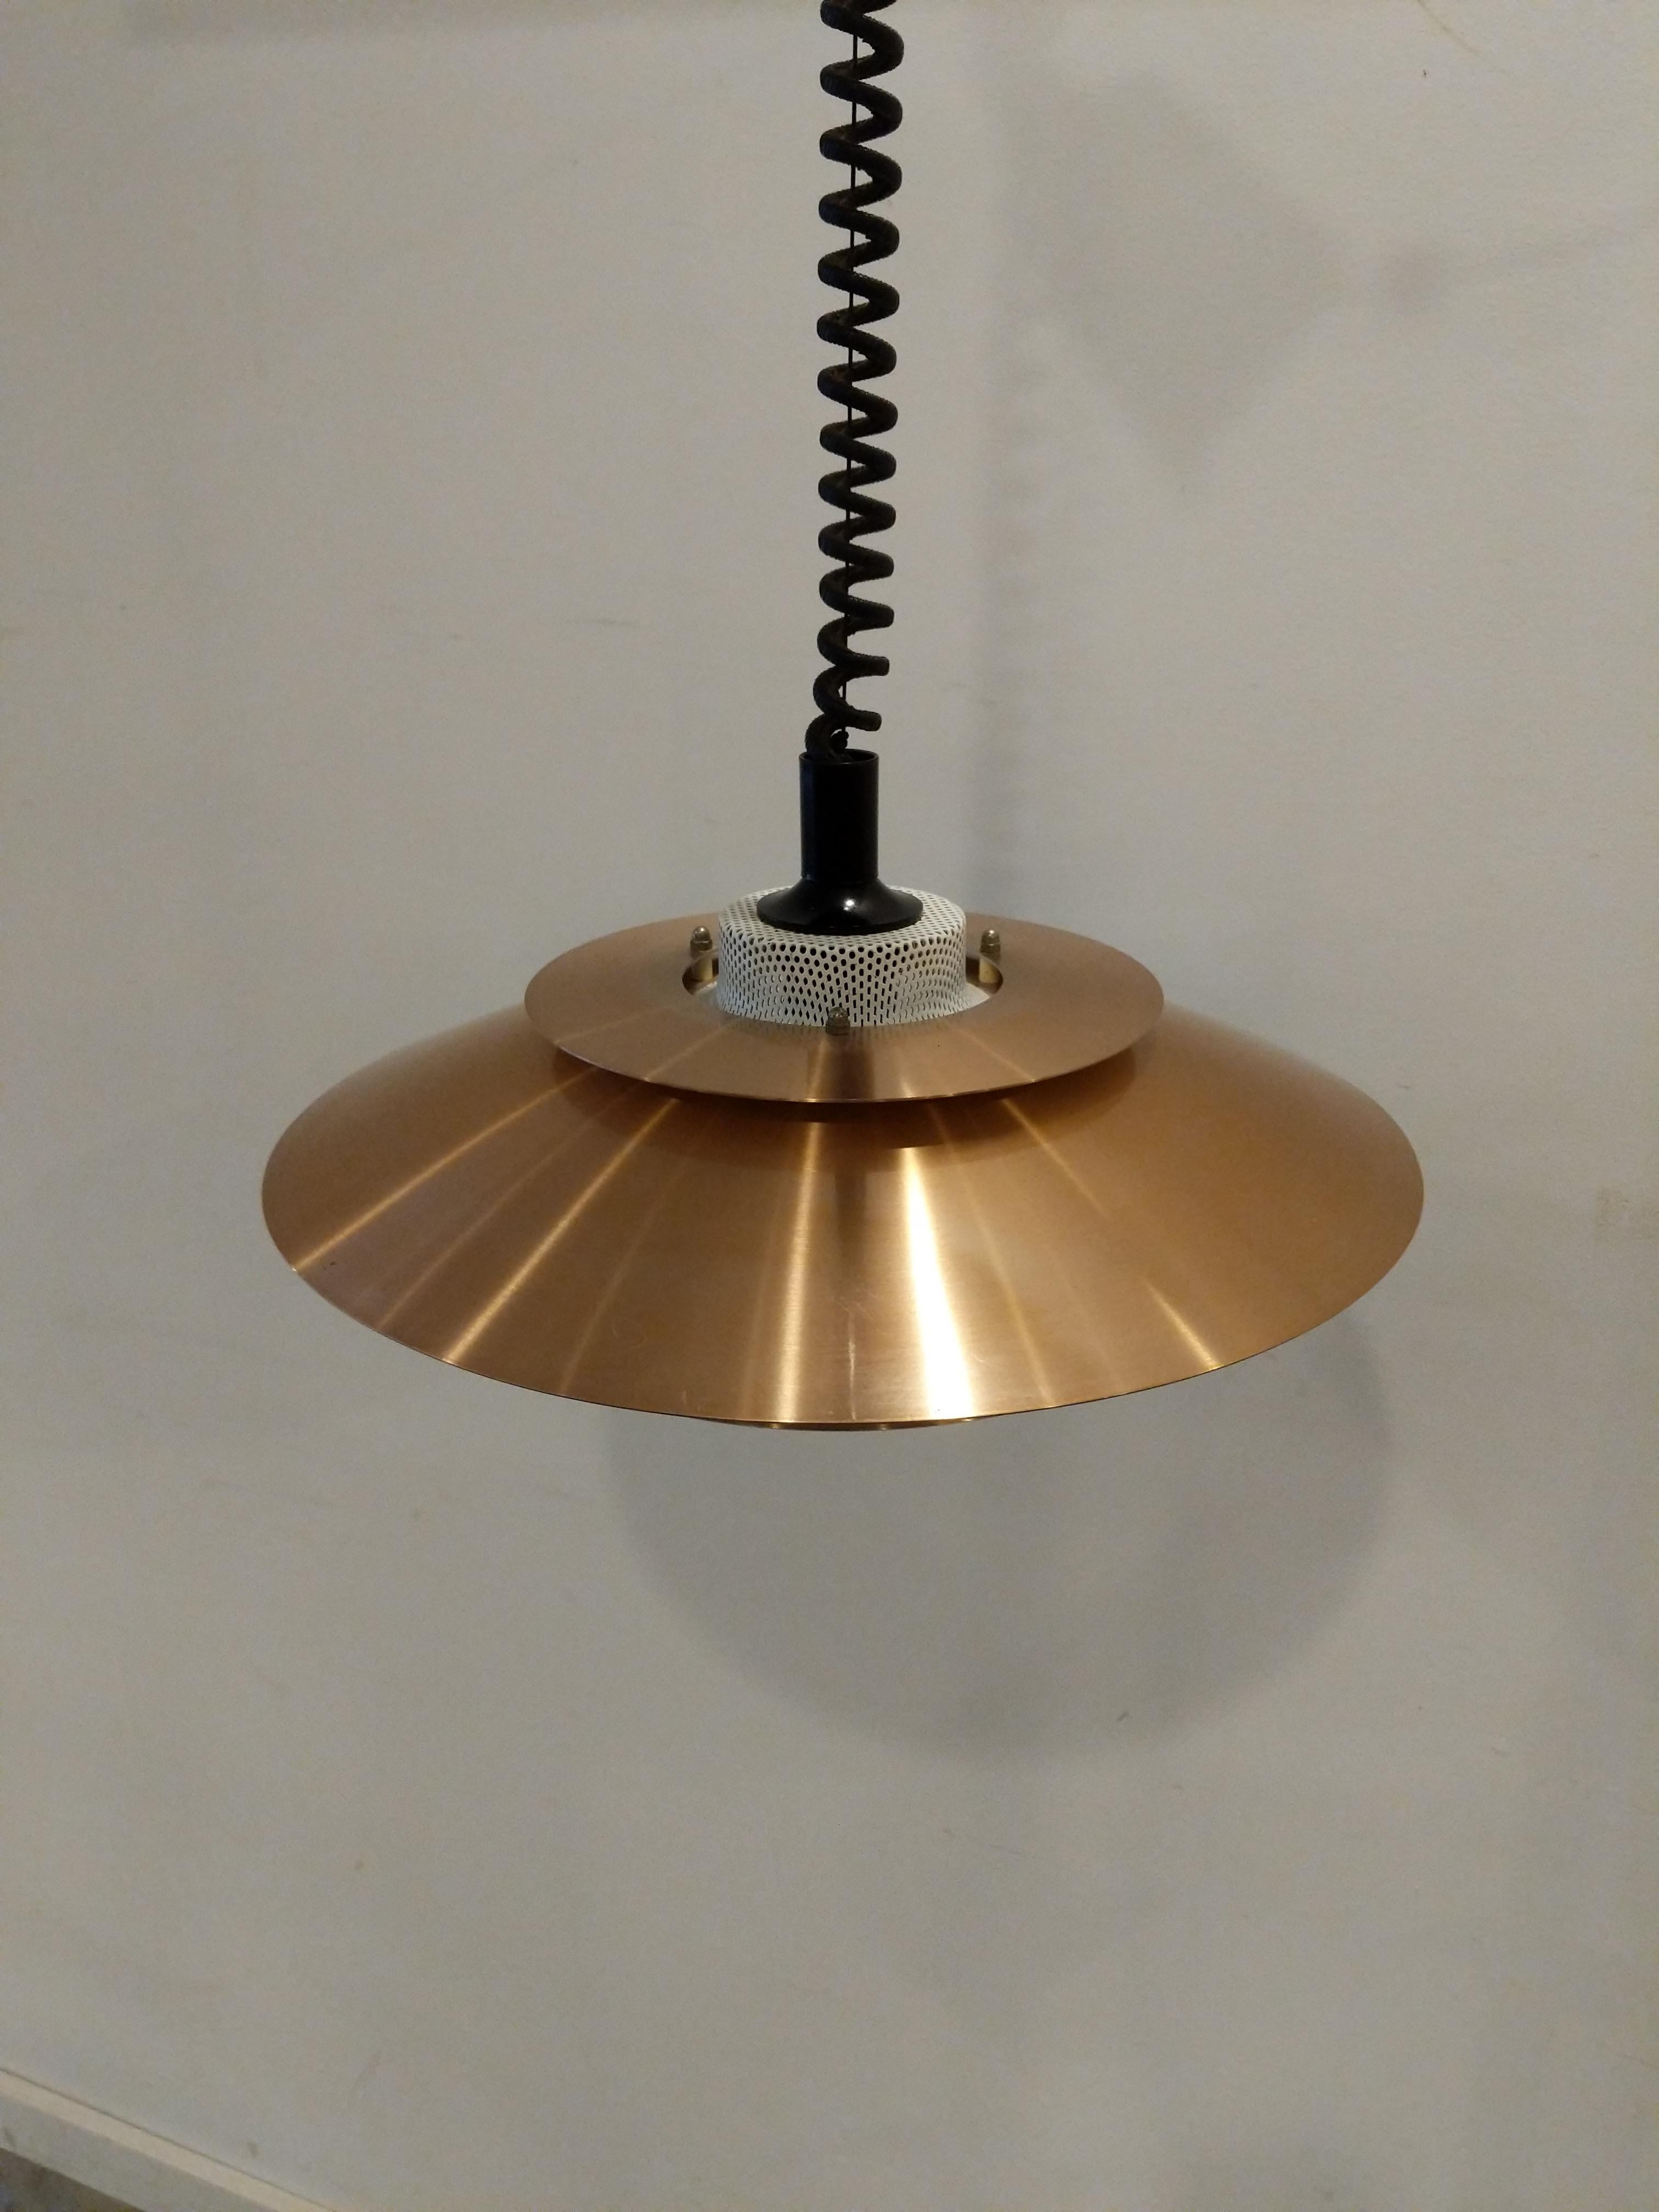 Authentic vintage mid century Danish / Scandinavian Modern hanging lamp / ceiling lamp / pendant light.

Design 8037-H by Jeka.

Imported directly from Denmark, this lamp is in great shape overall with minor wear from age (see photos).

The lamp is